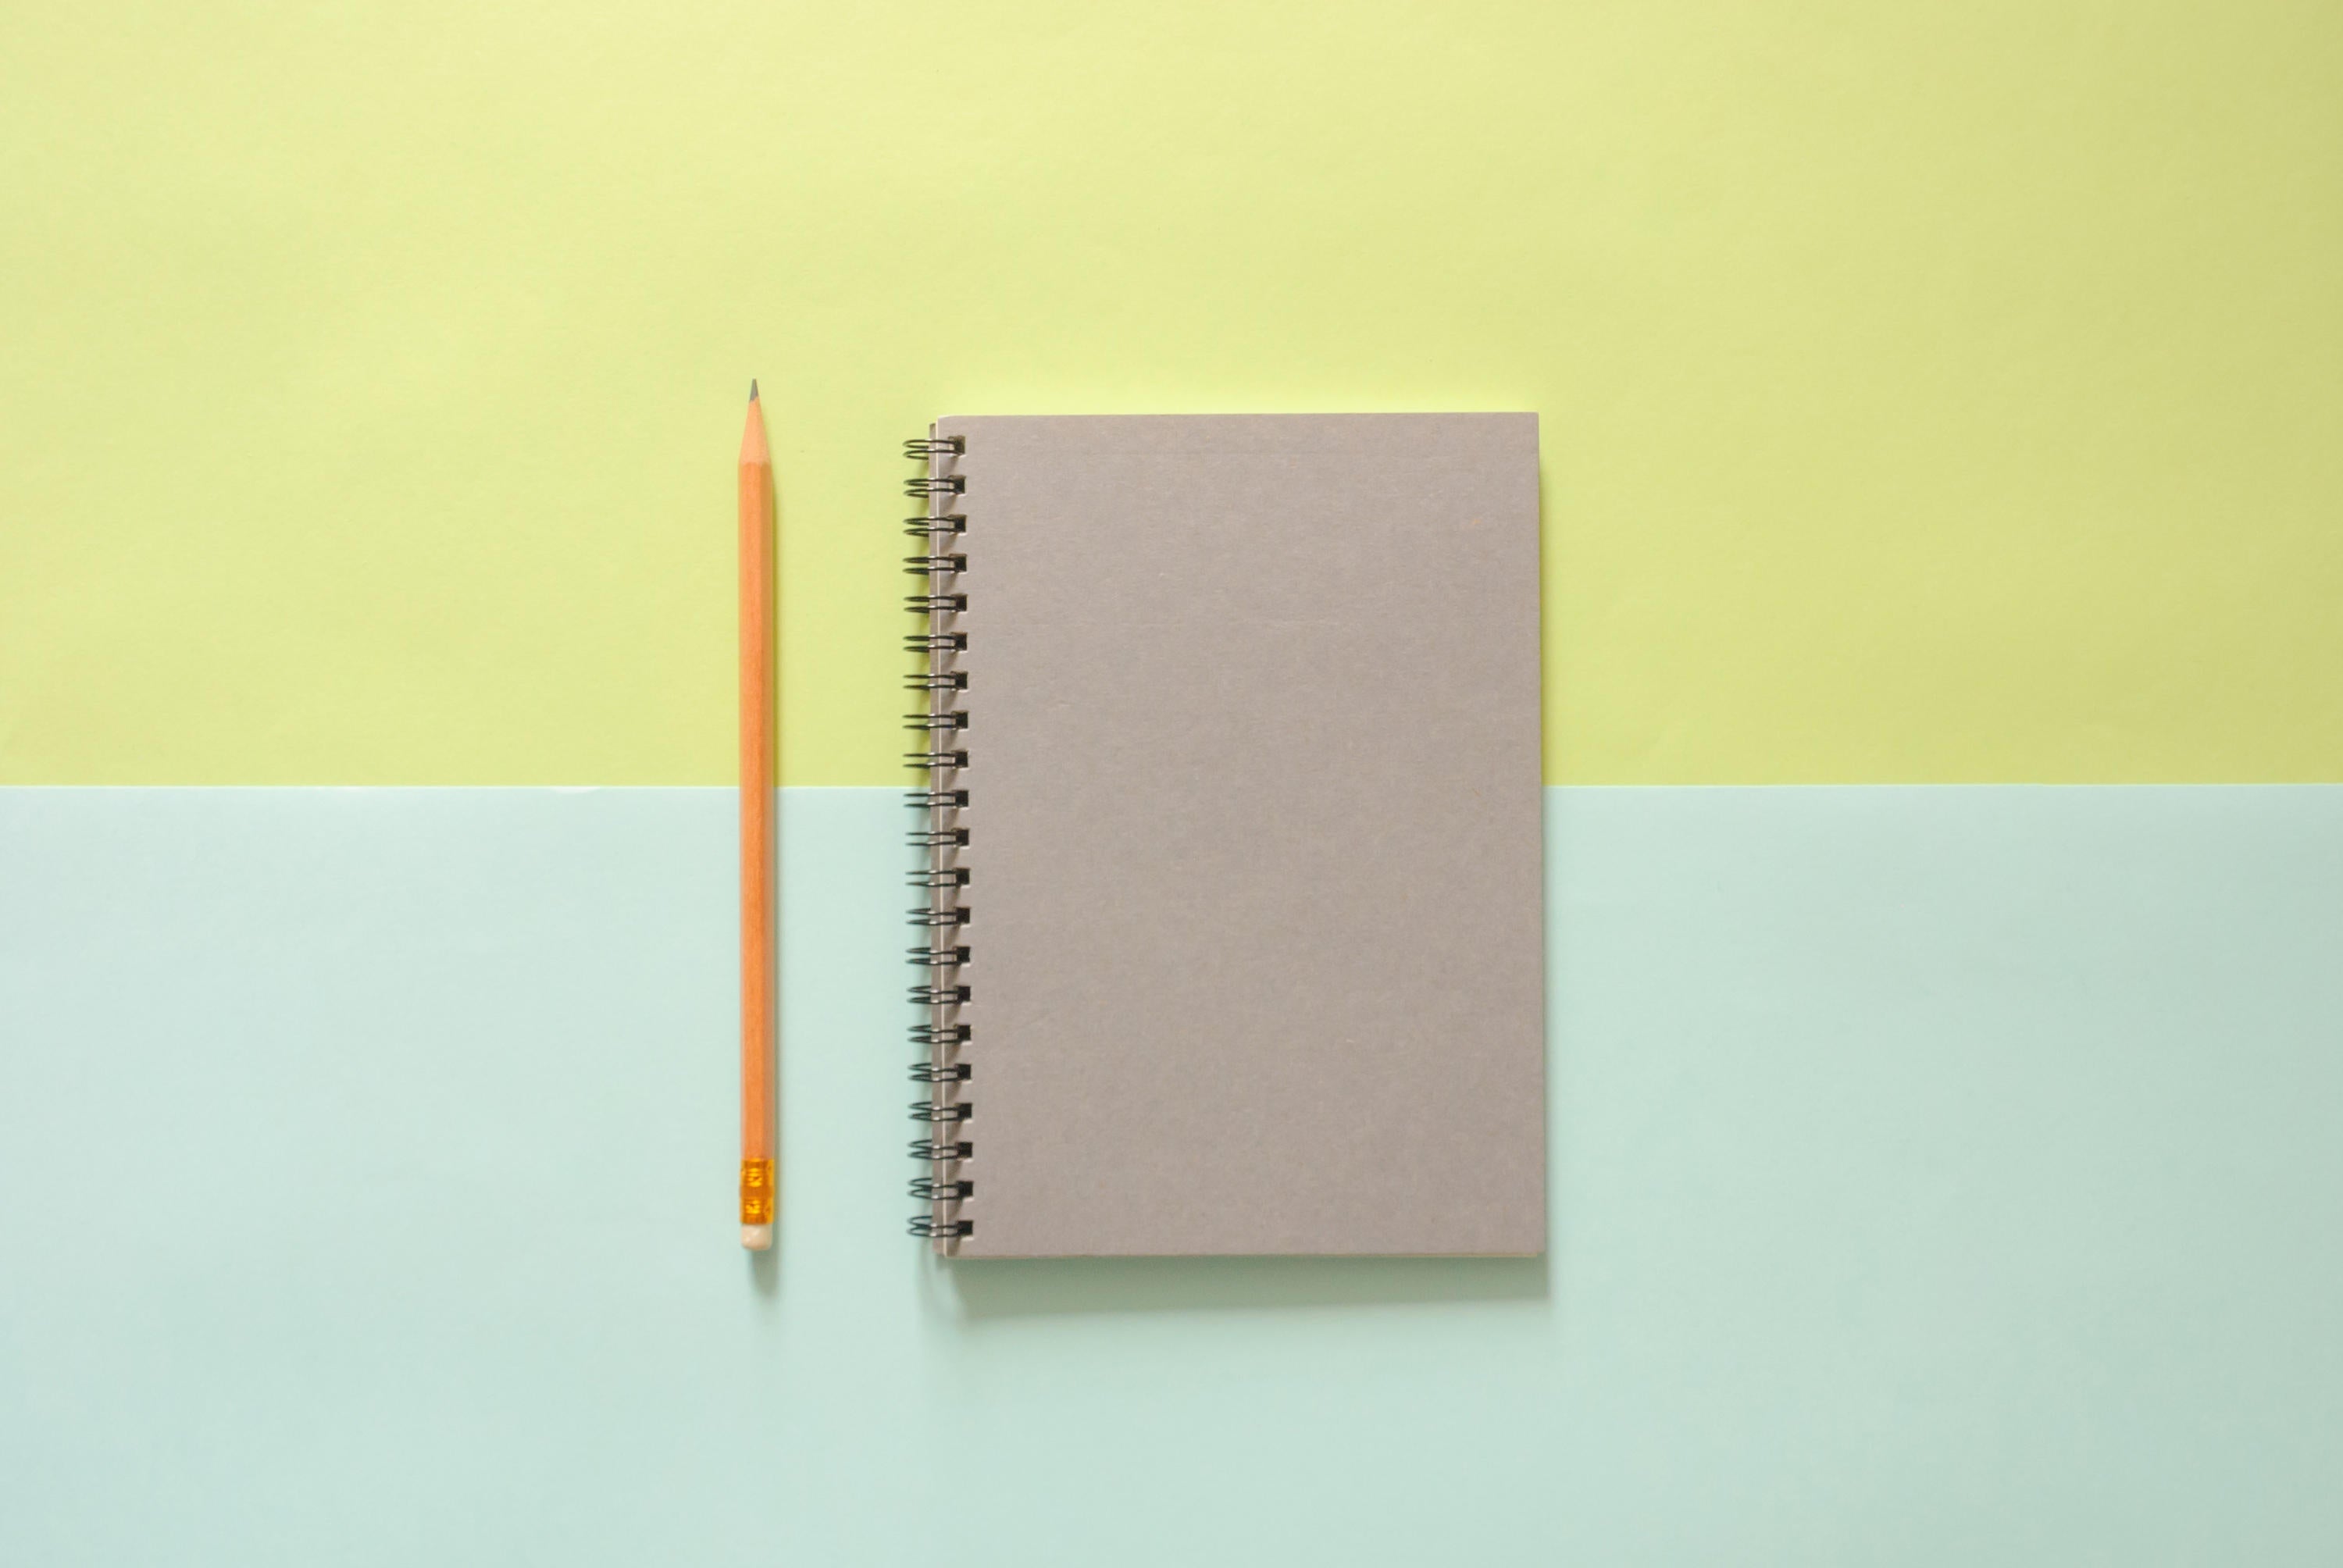 Notebook with pencil beside it